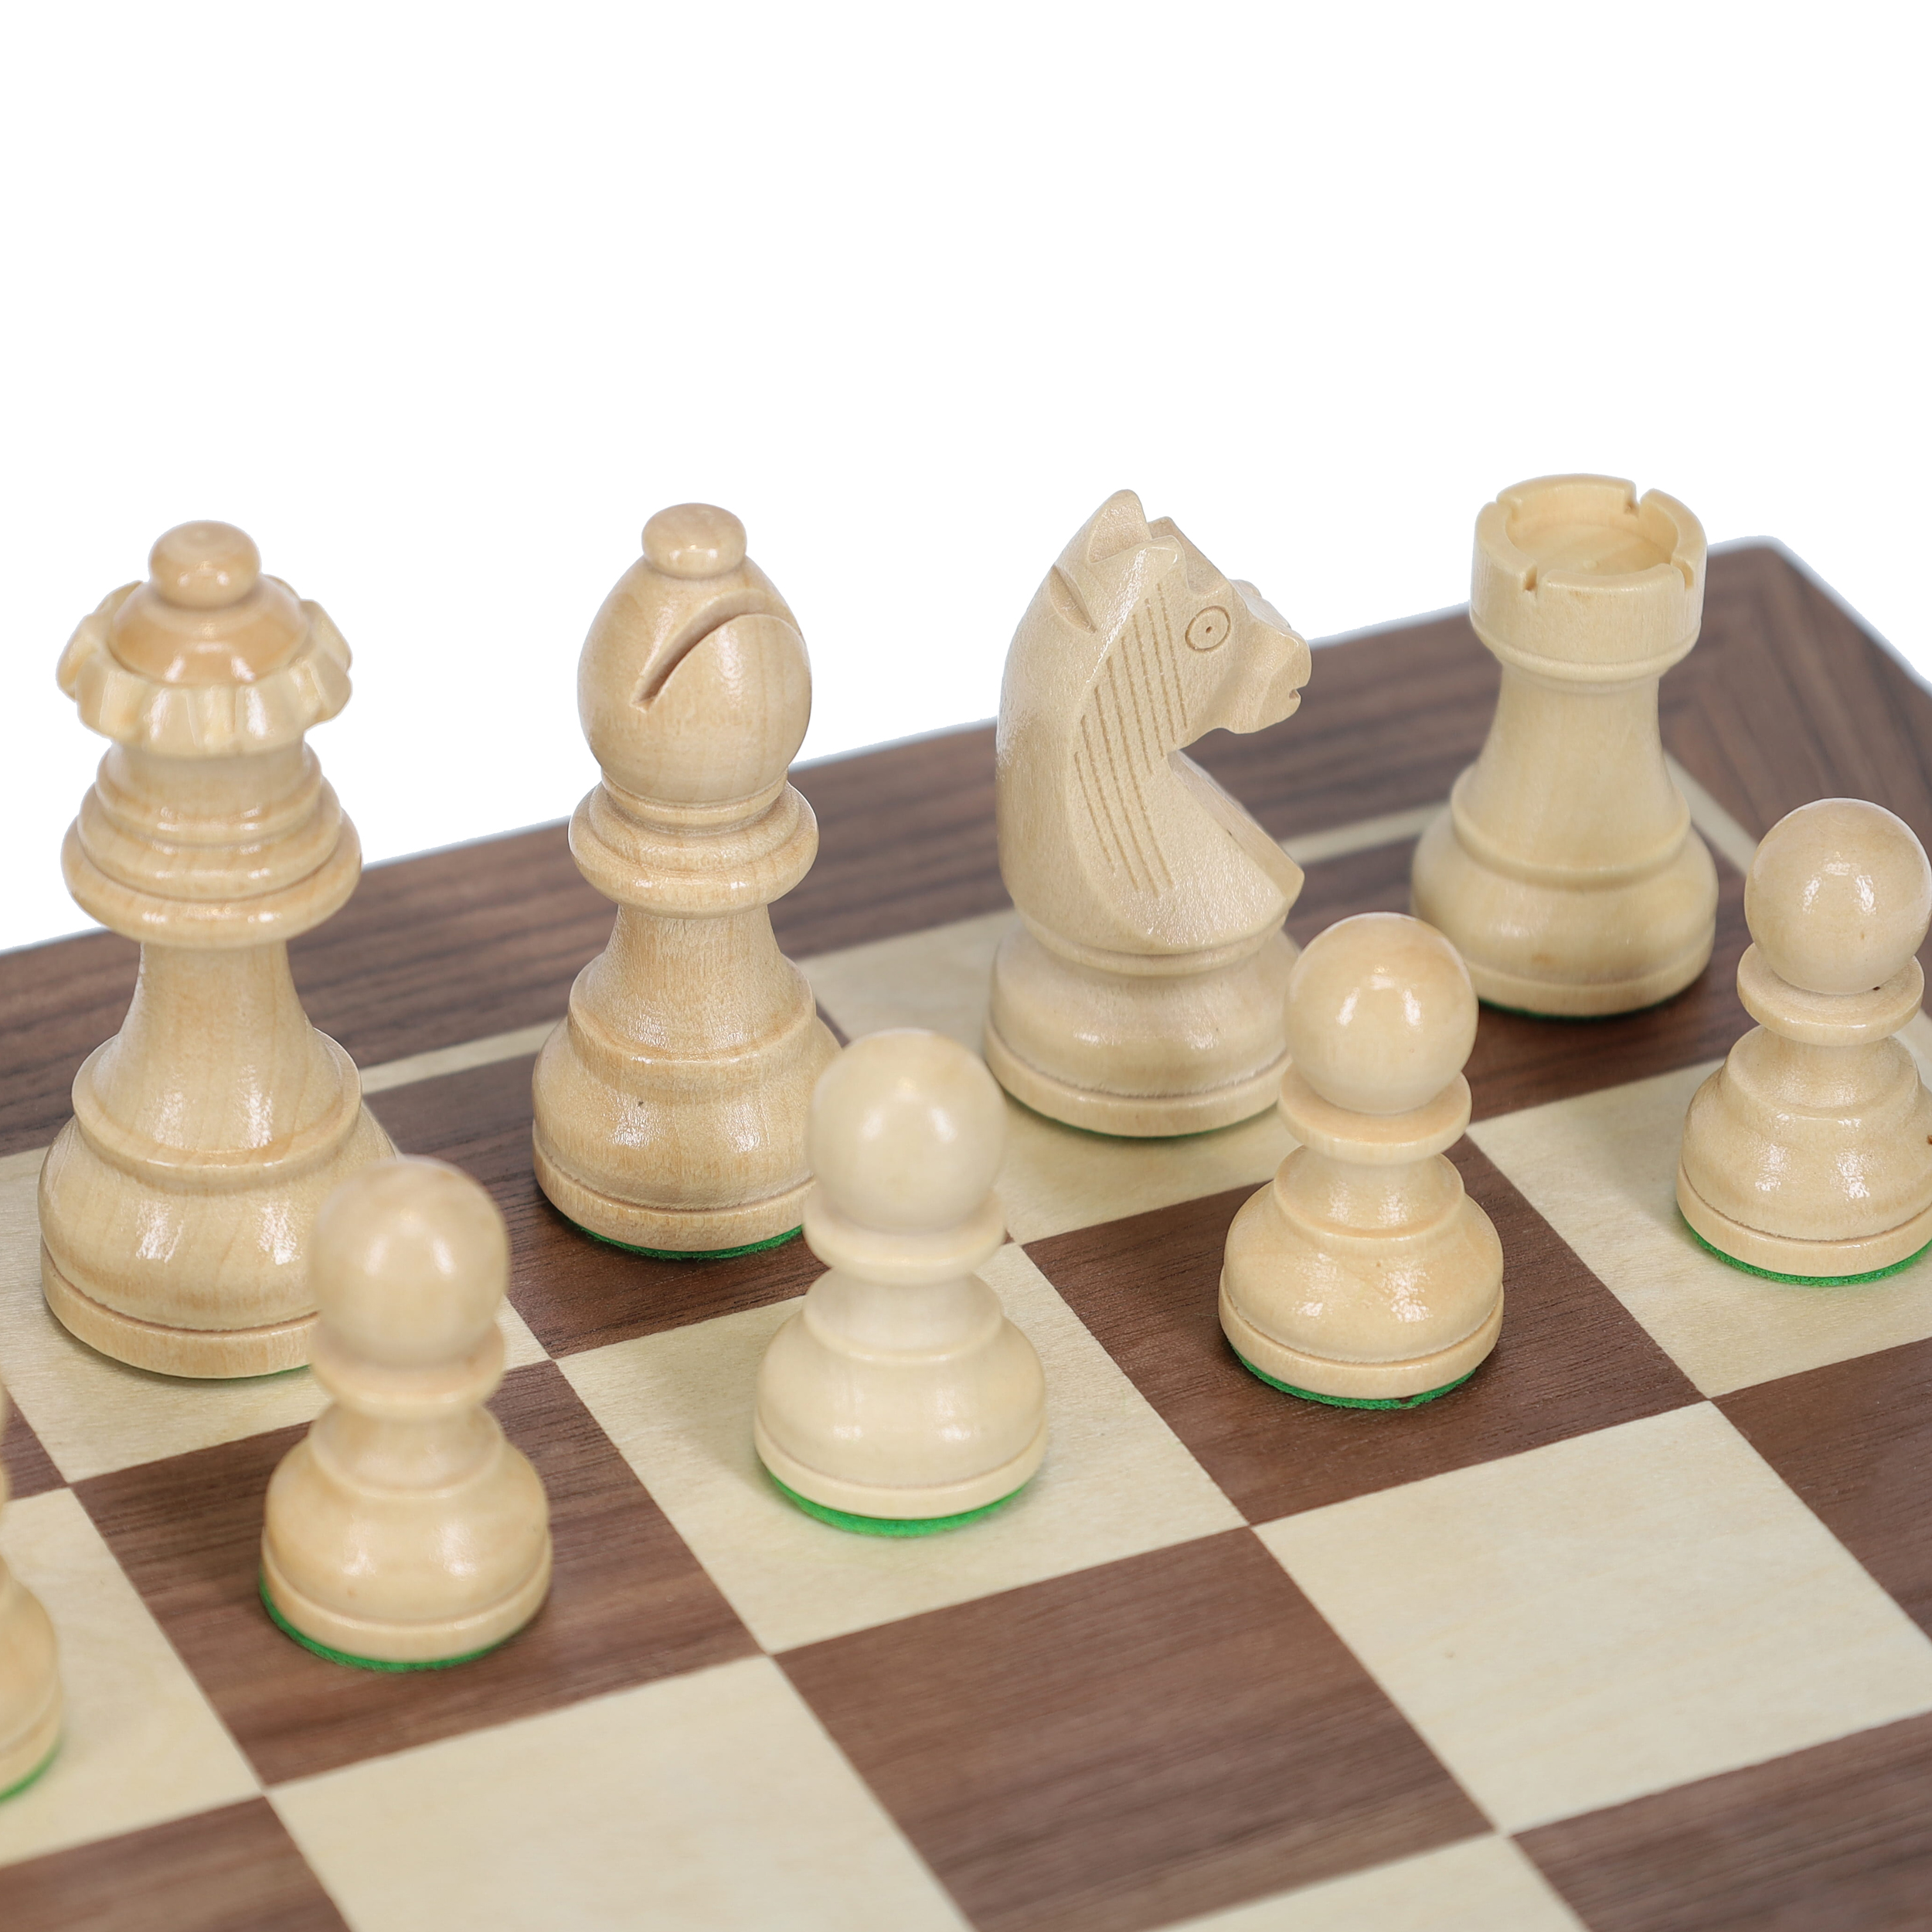 WE Games Traditional Staunton Wood Chess Set - 14.75 inch Board with 3.75  inch King